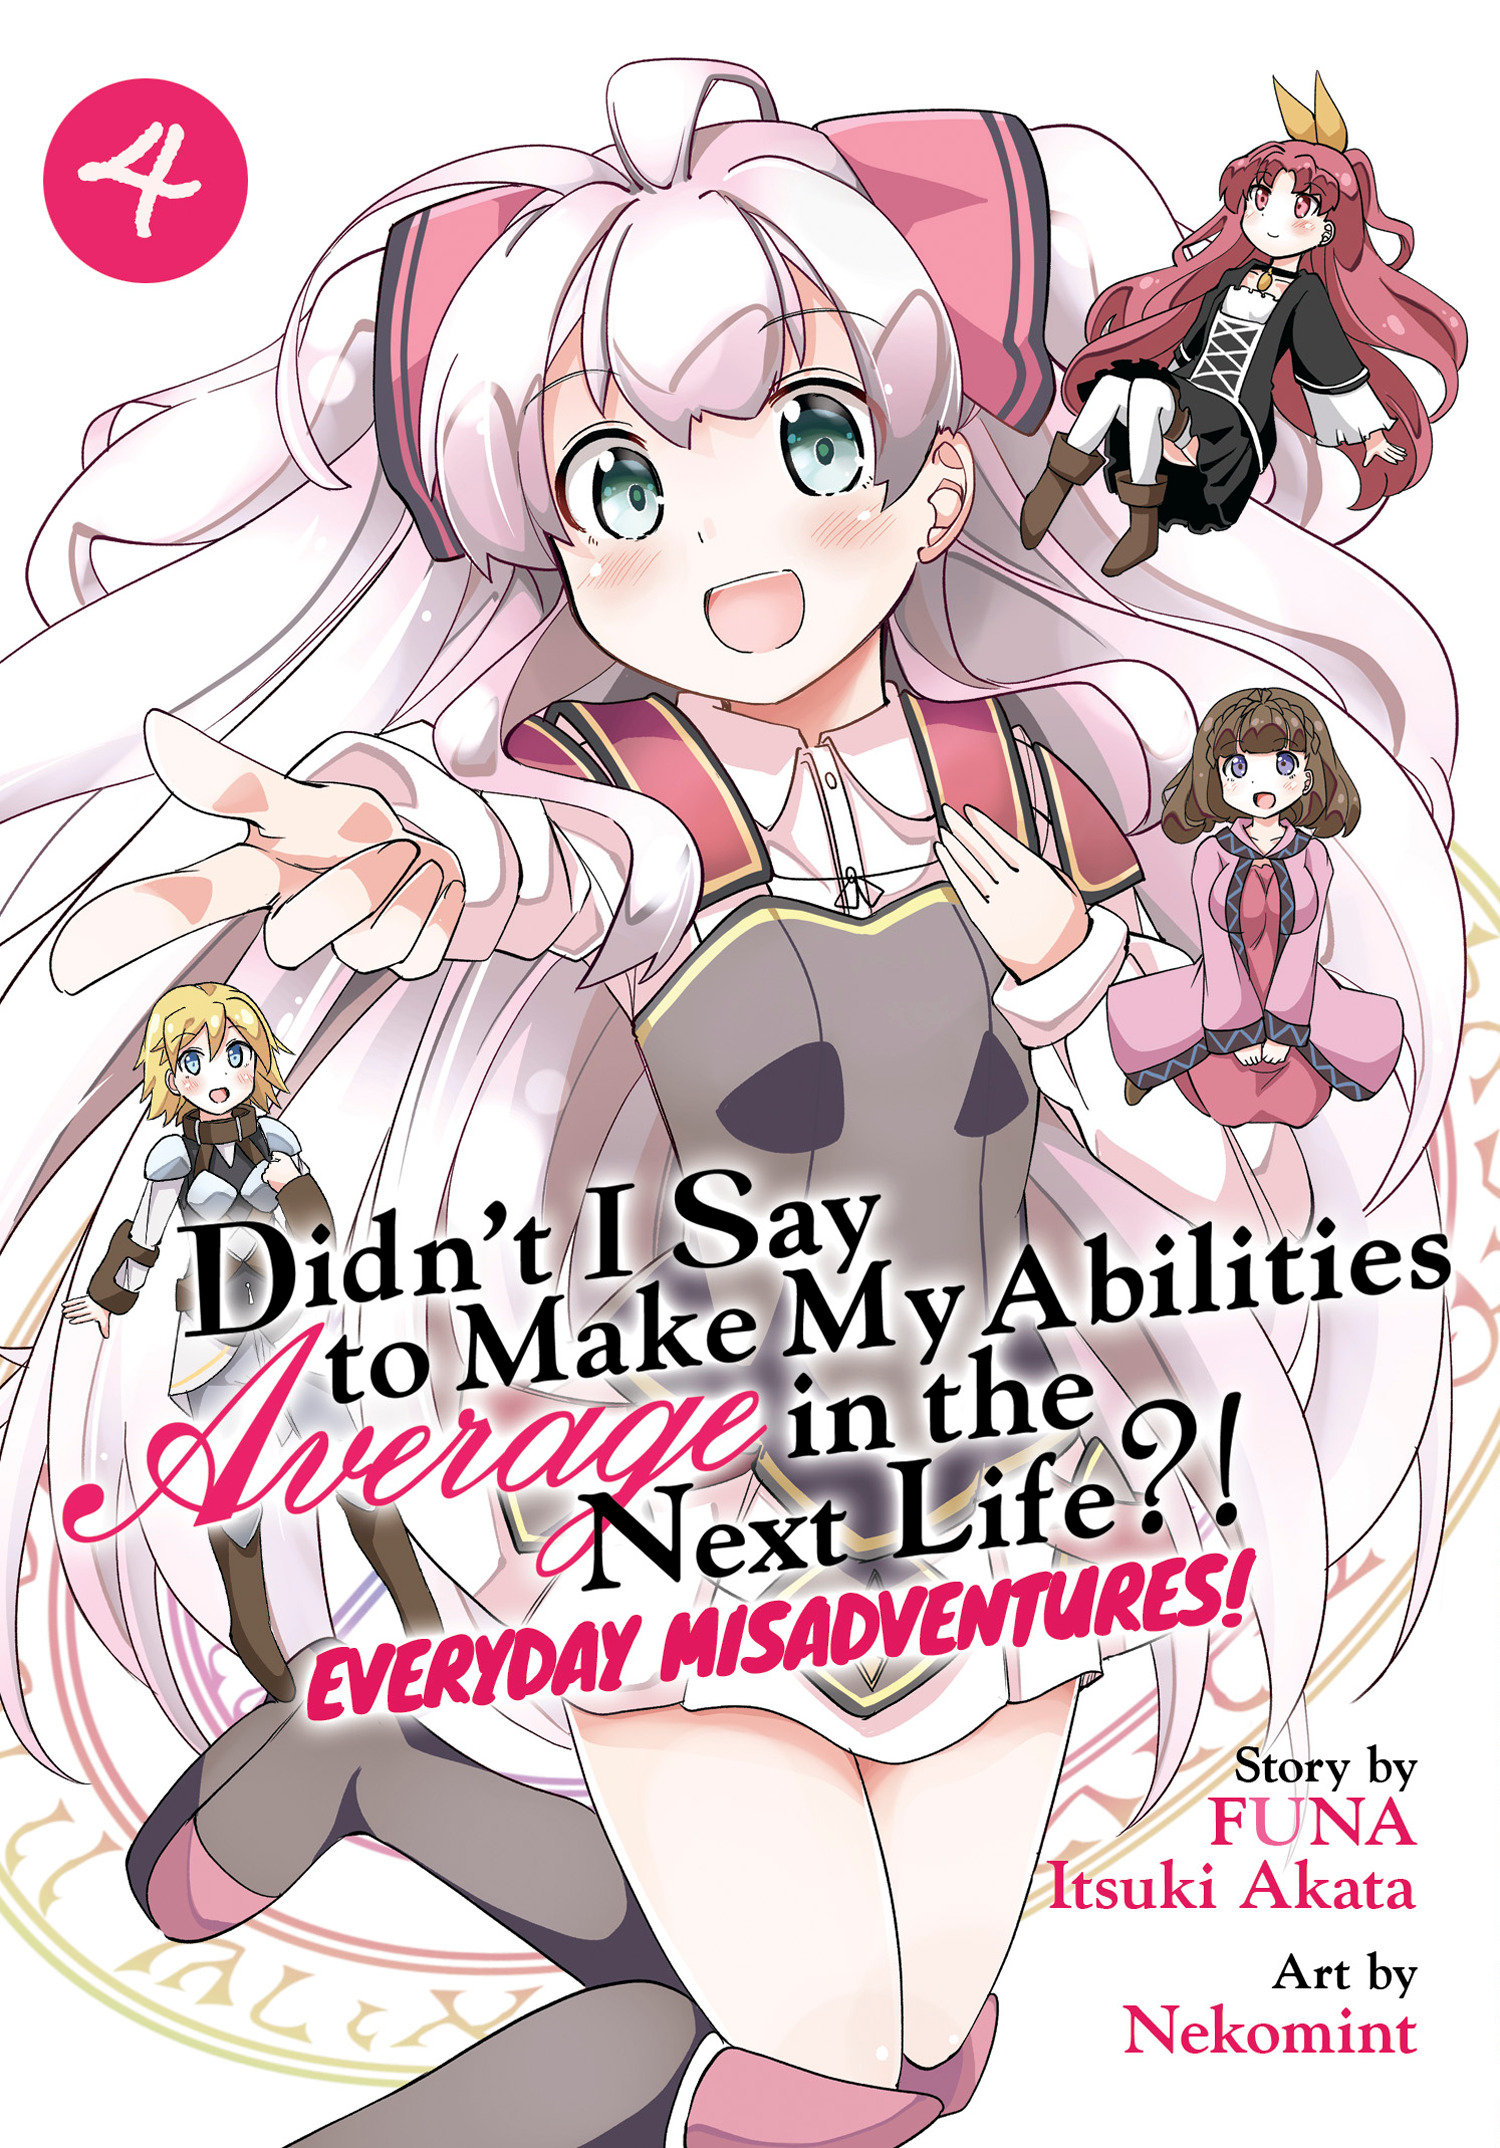 Didn't I Say to Make My Abilities Average in the Next Life, Everyday Misadventures Manga Volume 4